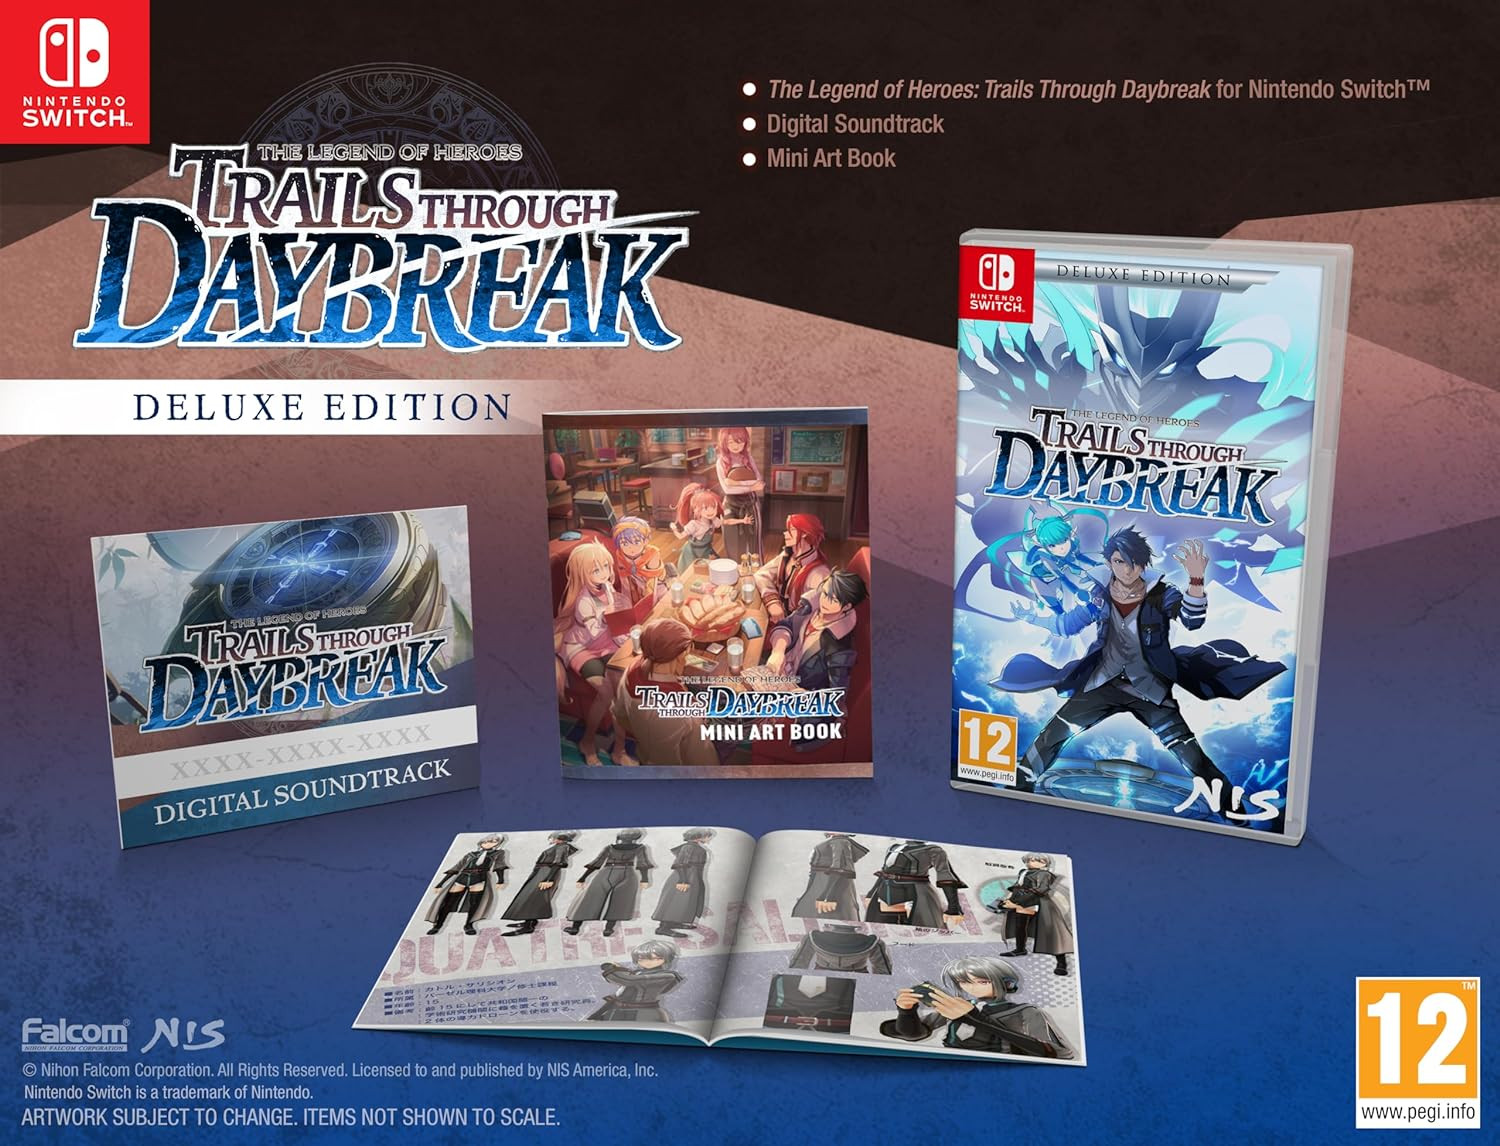 The Legend of Heroes Trails Through Daybreak Deluxe Edition - Nintendo Switch